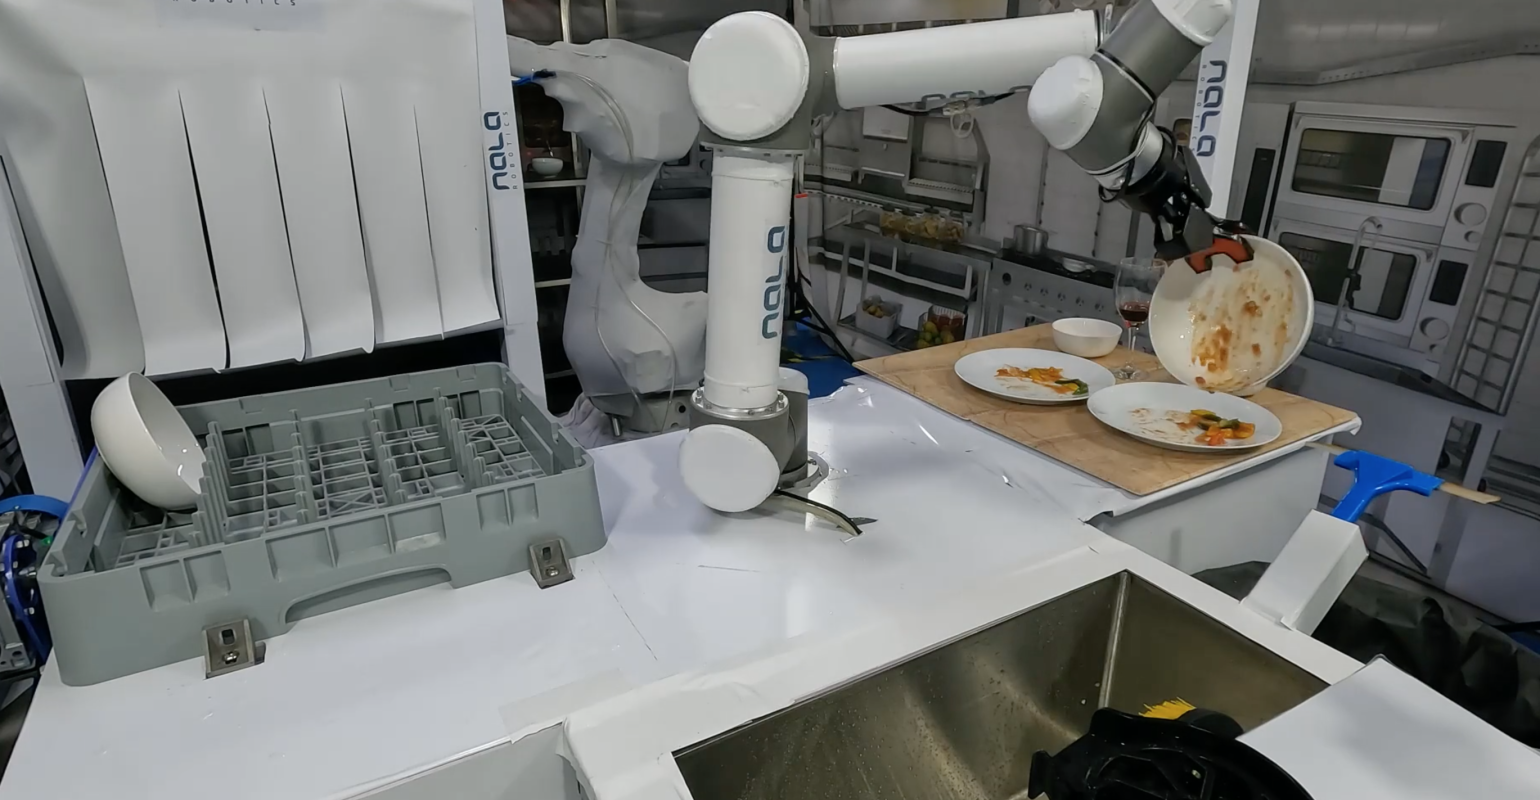 The future is now: how robots will change kitchens